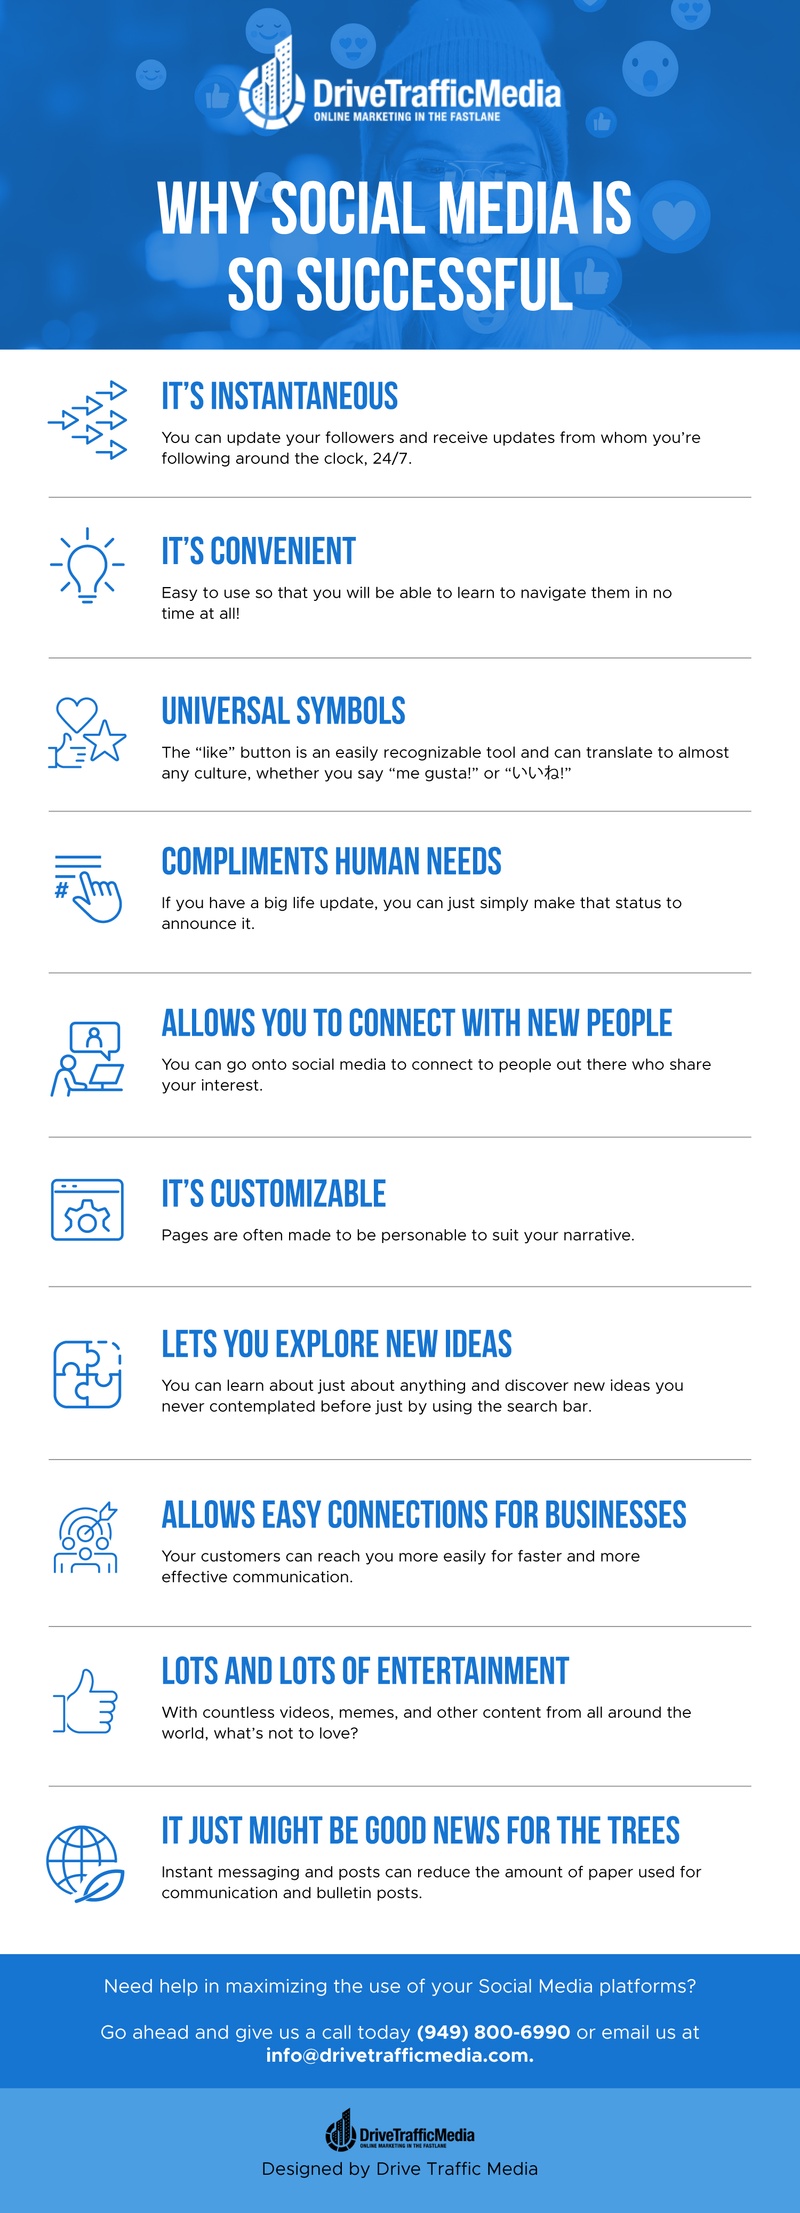 Why-Social-Media-Is-So-Successful-infographic